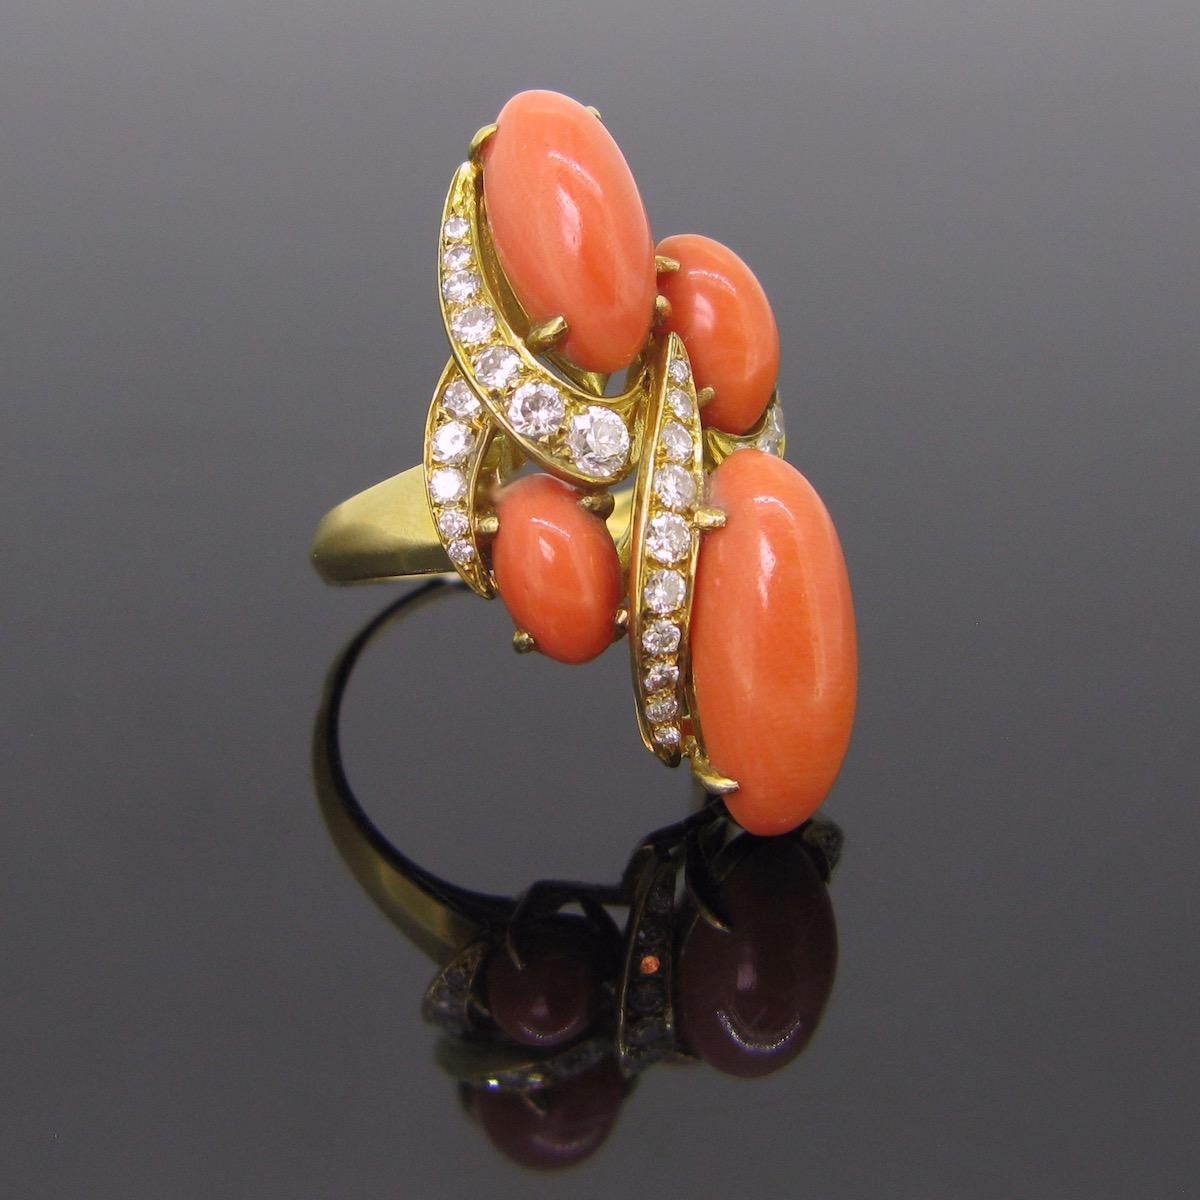 A beautiful coral and diamonds ring. This one was perfectly handcrafted in 18kt yellow gold and adorned with 4 beads of polished corals. These are in very good vintage condition. They have a beautiful reddish orange color. The largest bead is 17,78